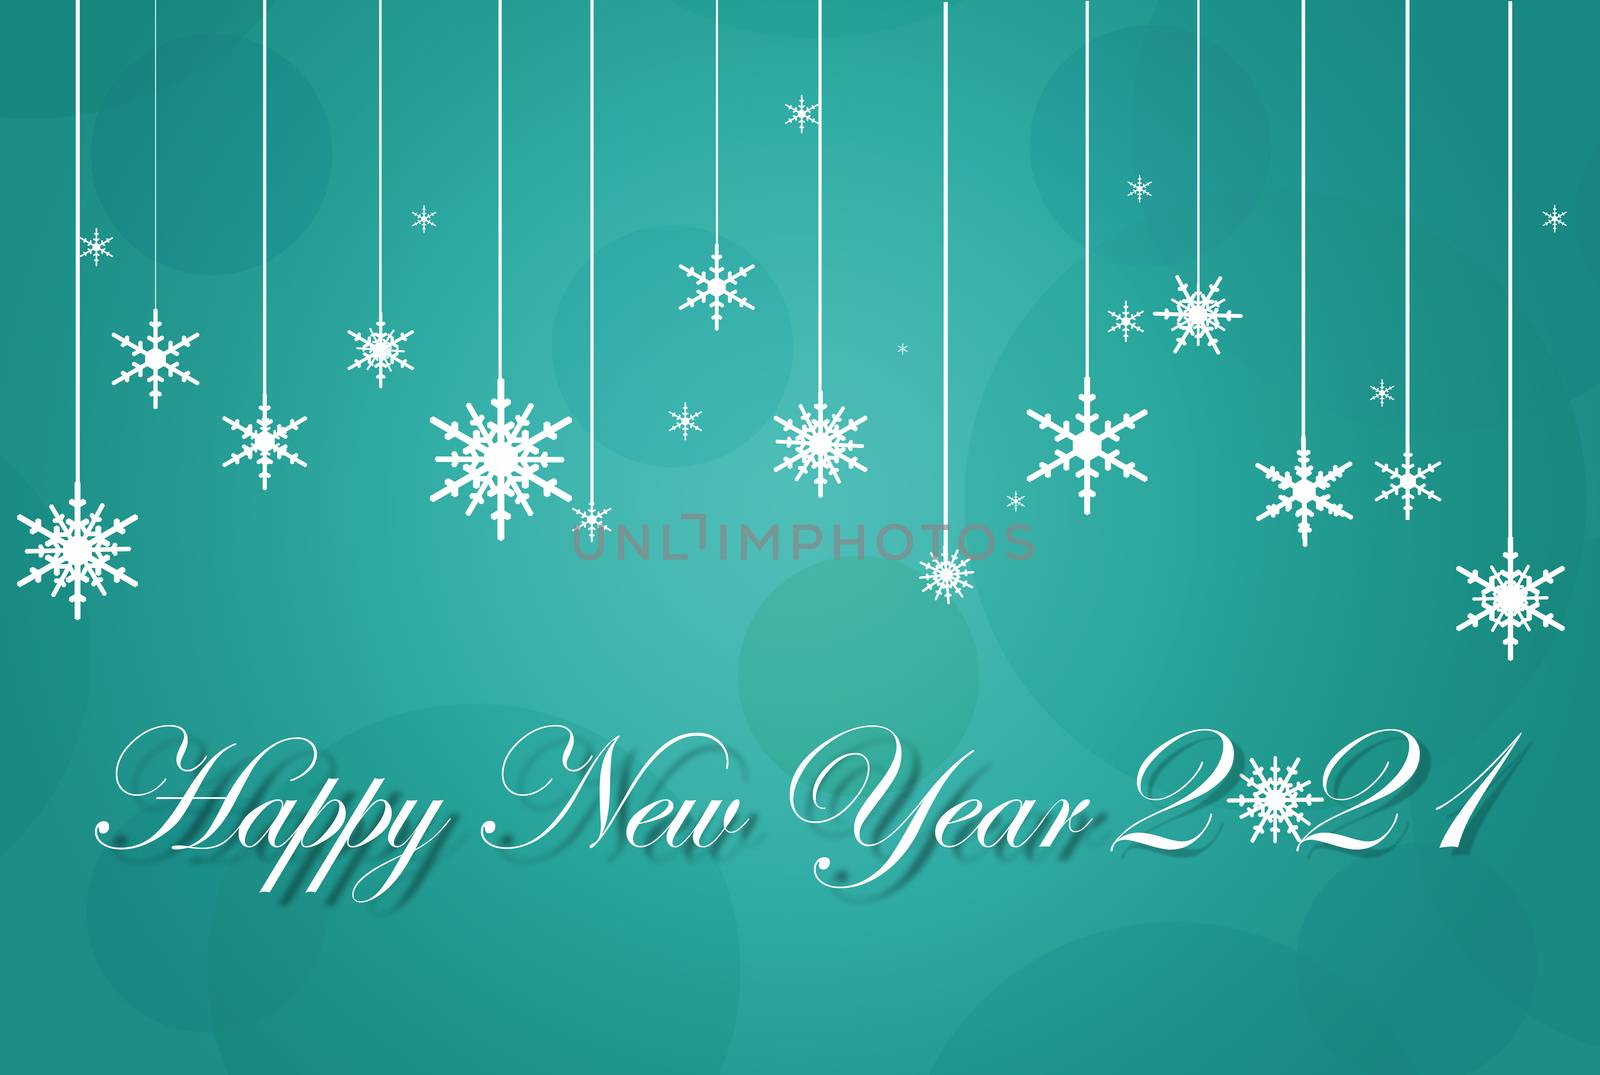 Happy New Year 2021 text and icons of snowflakes on turquoise blue background. Christmas, New Year greeting card, frame, banner.